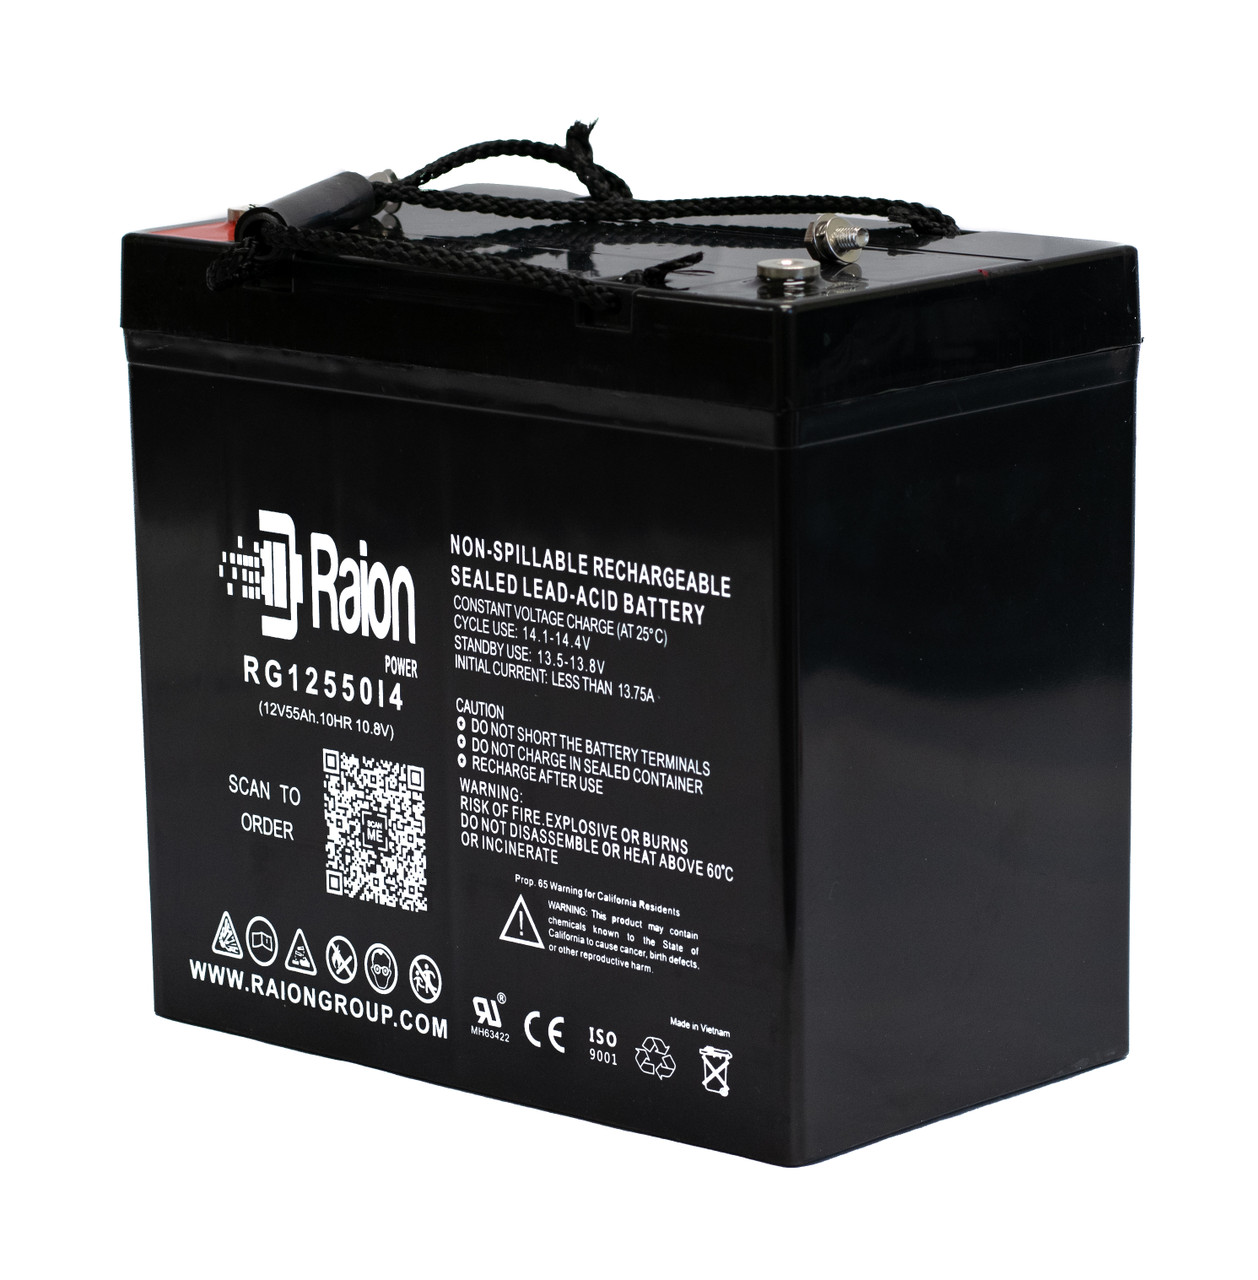 Raion Power 12V 55Ah 22NF Mobility Scooter Battery Replacement for Golden Technology GA 531